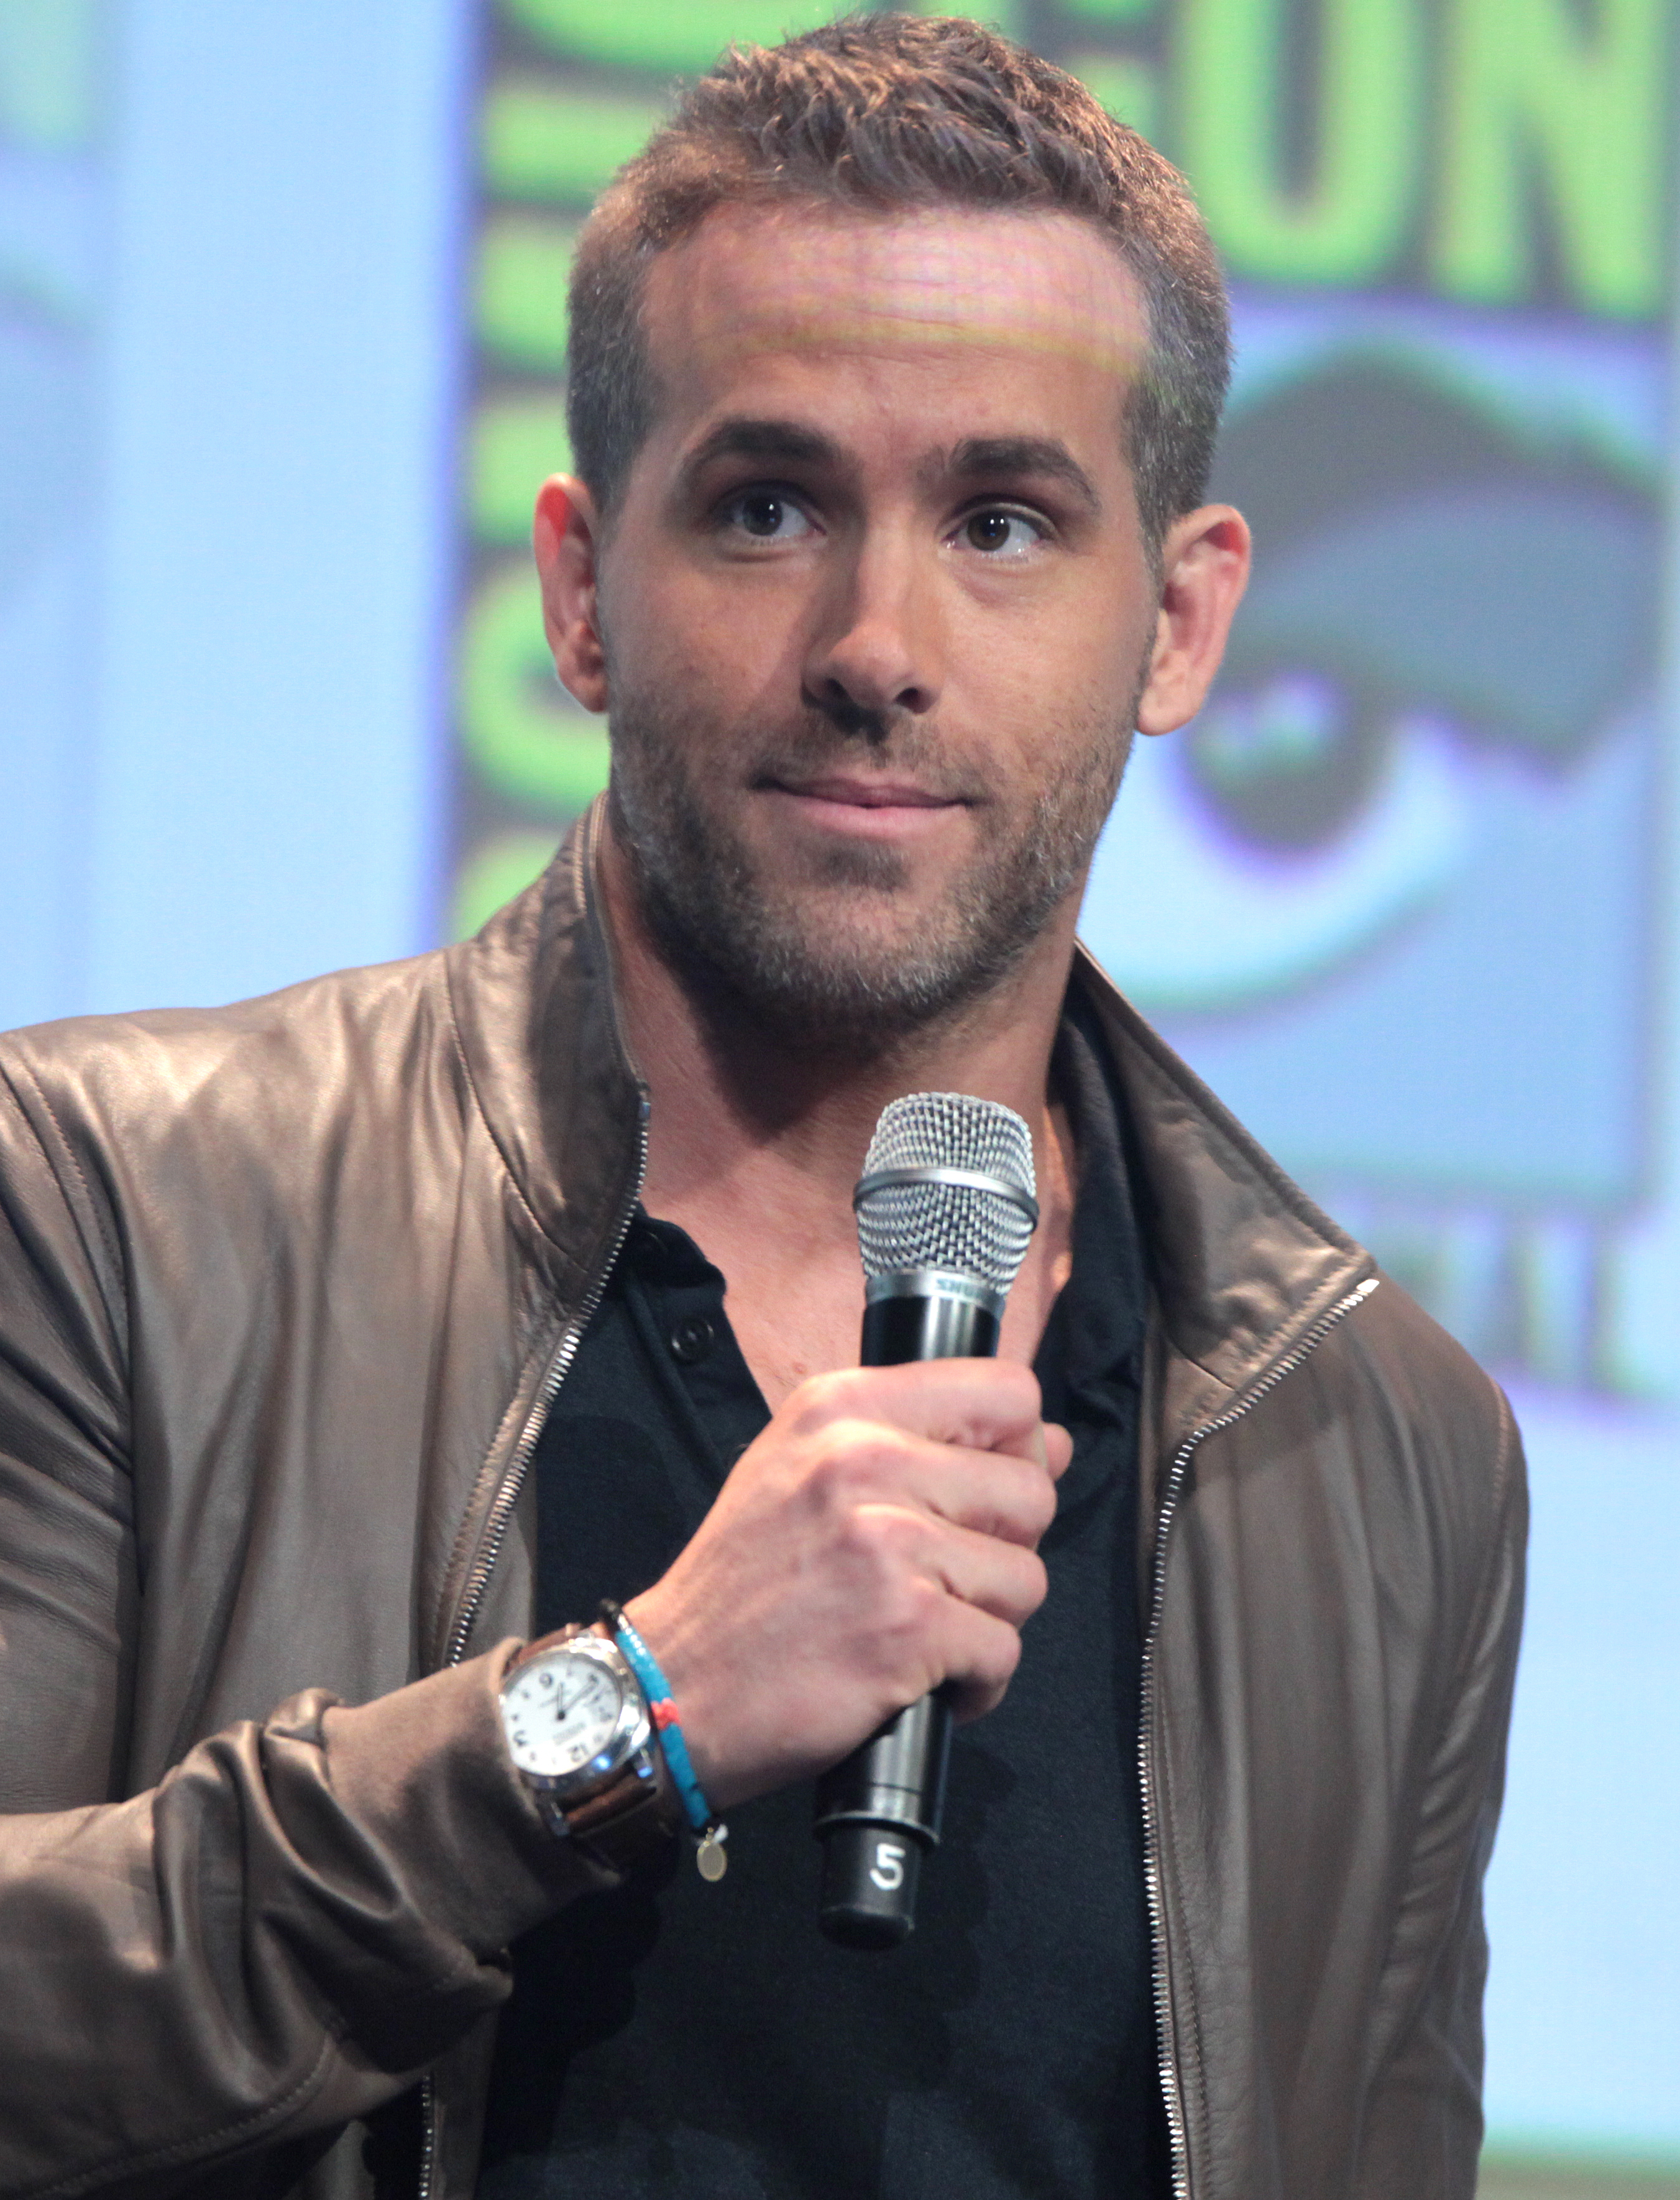 How Old Is Ryan Reynolds? A Look at the Actor's Age